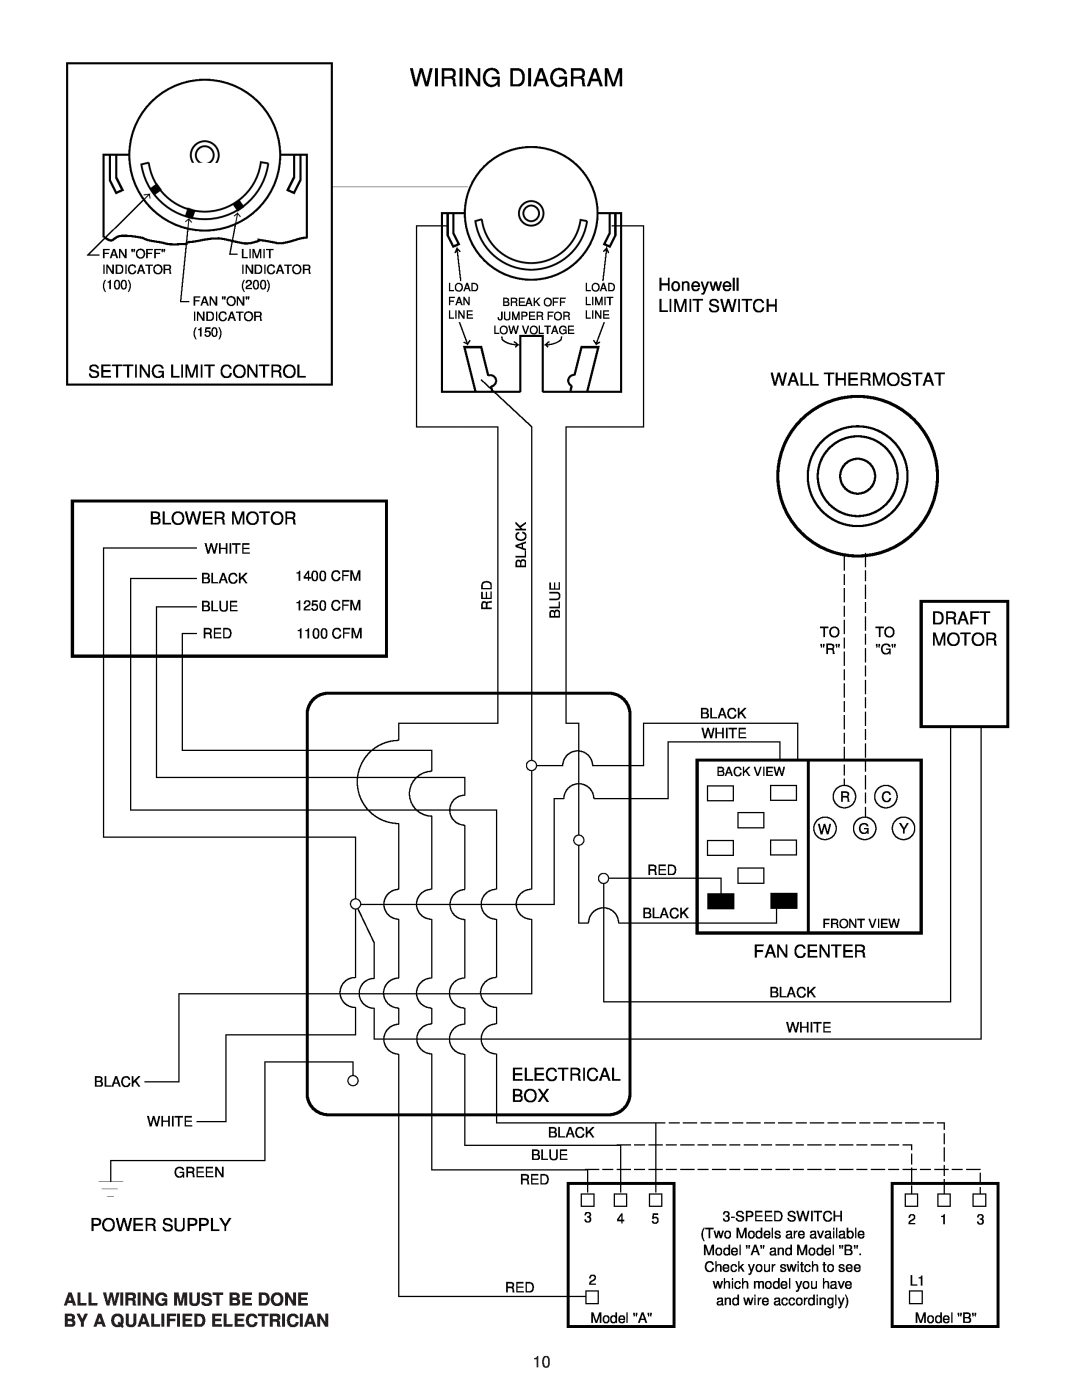 United States Stove 1800, 1600 Wiring Diagram, Setting Limit Control, Honeywell LIMIT SWITCH WALL THERMOSTAT, Blower Motor 